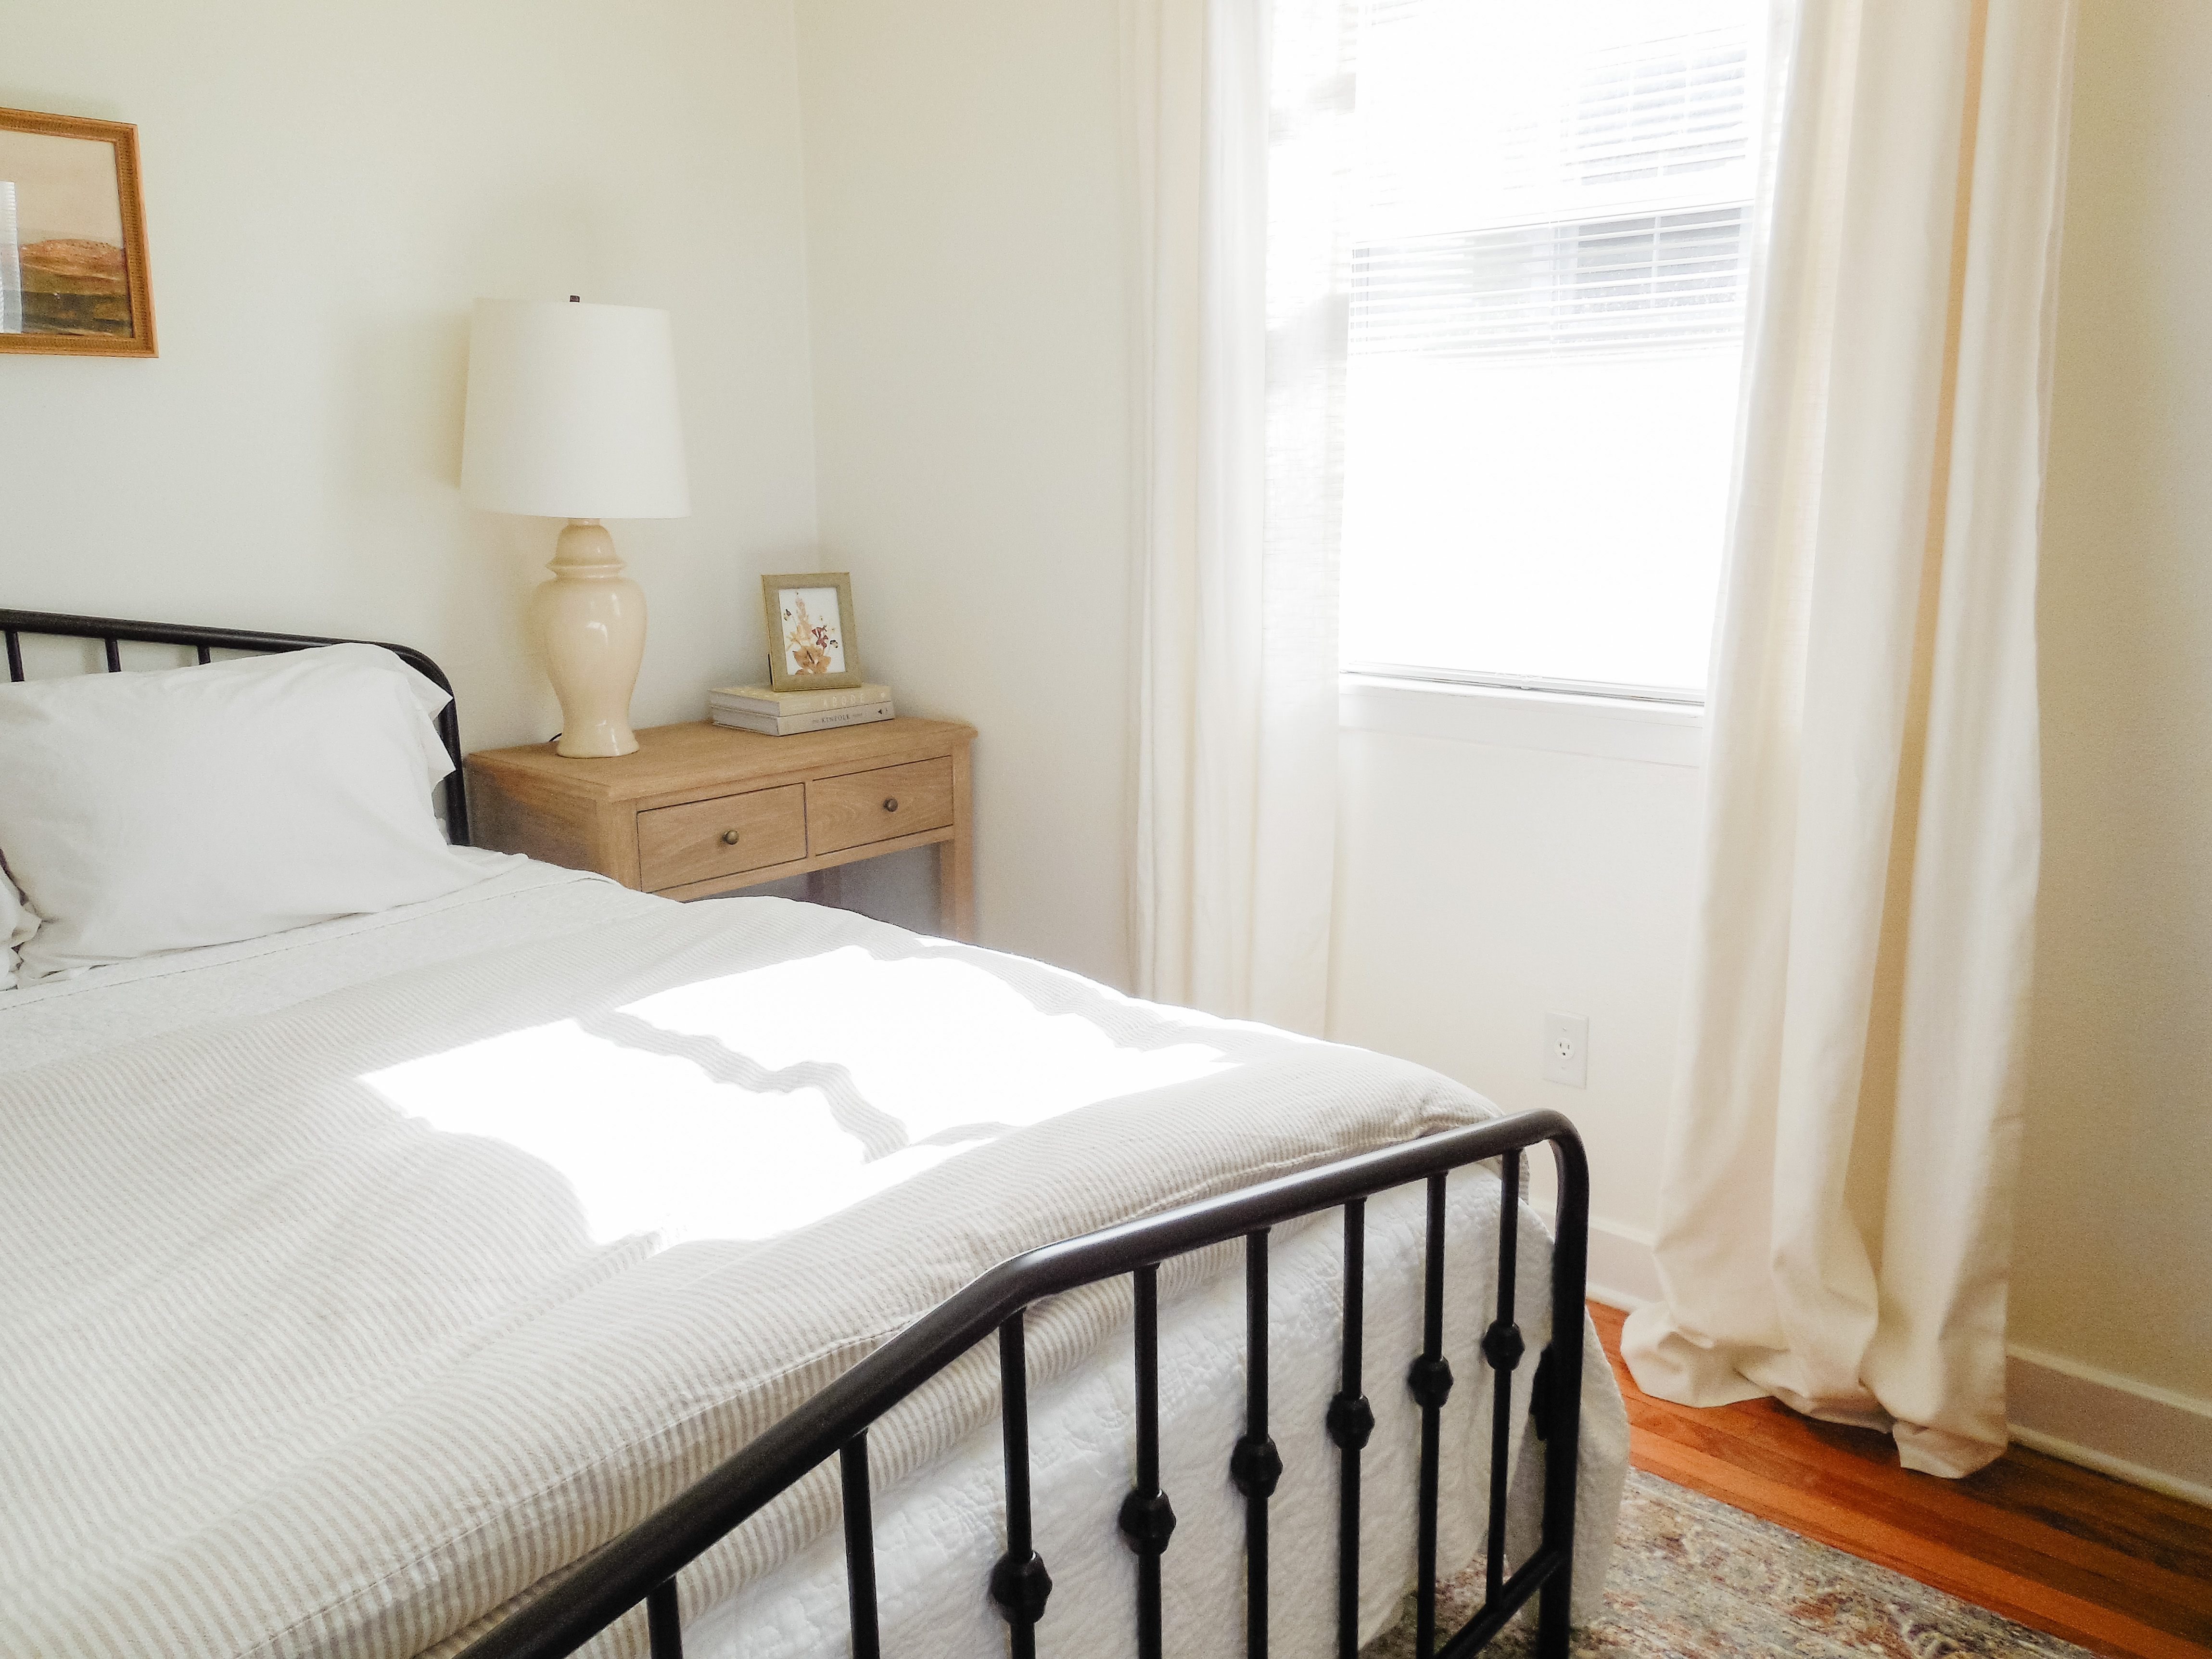 Be Our Guest: Guest Bedroom Reveal